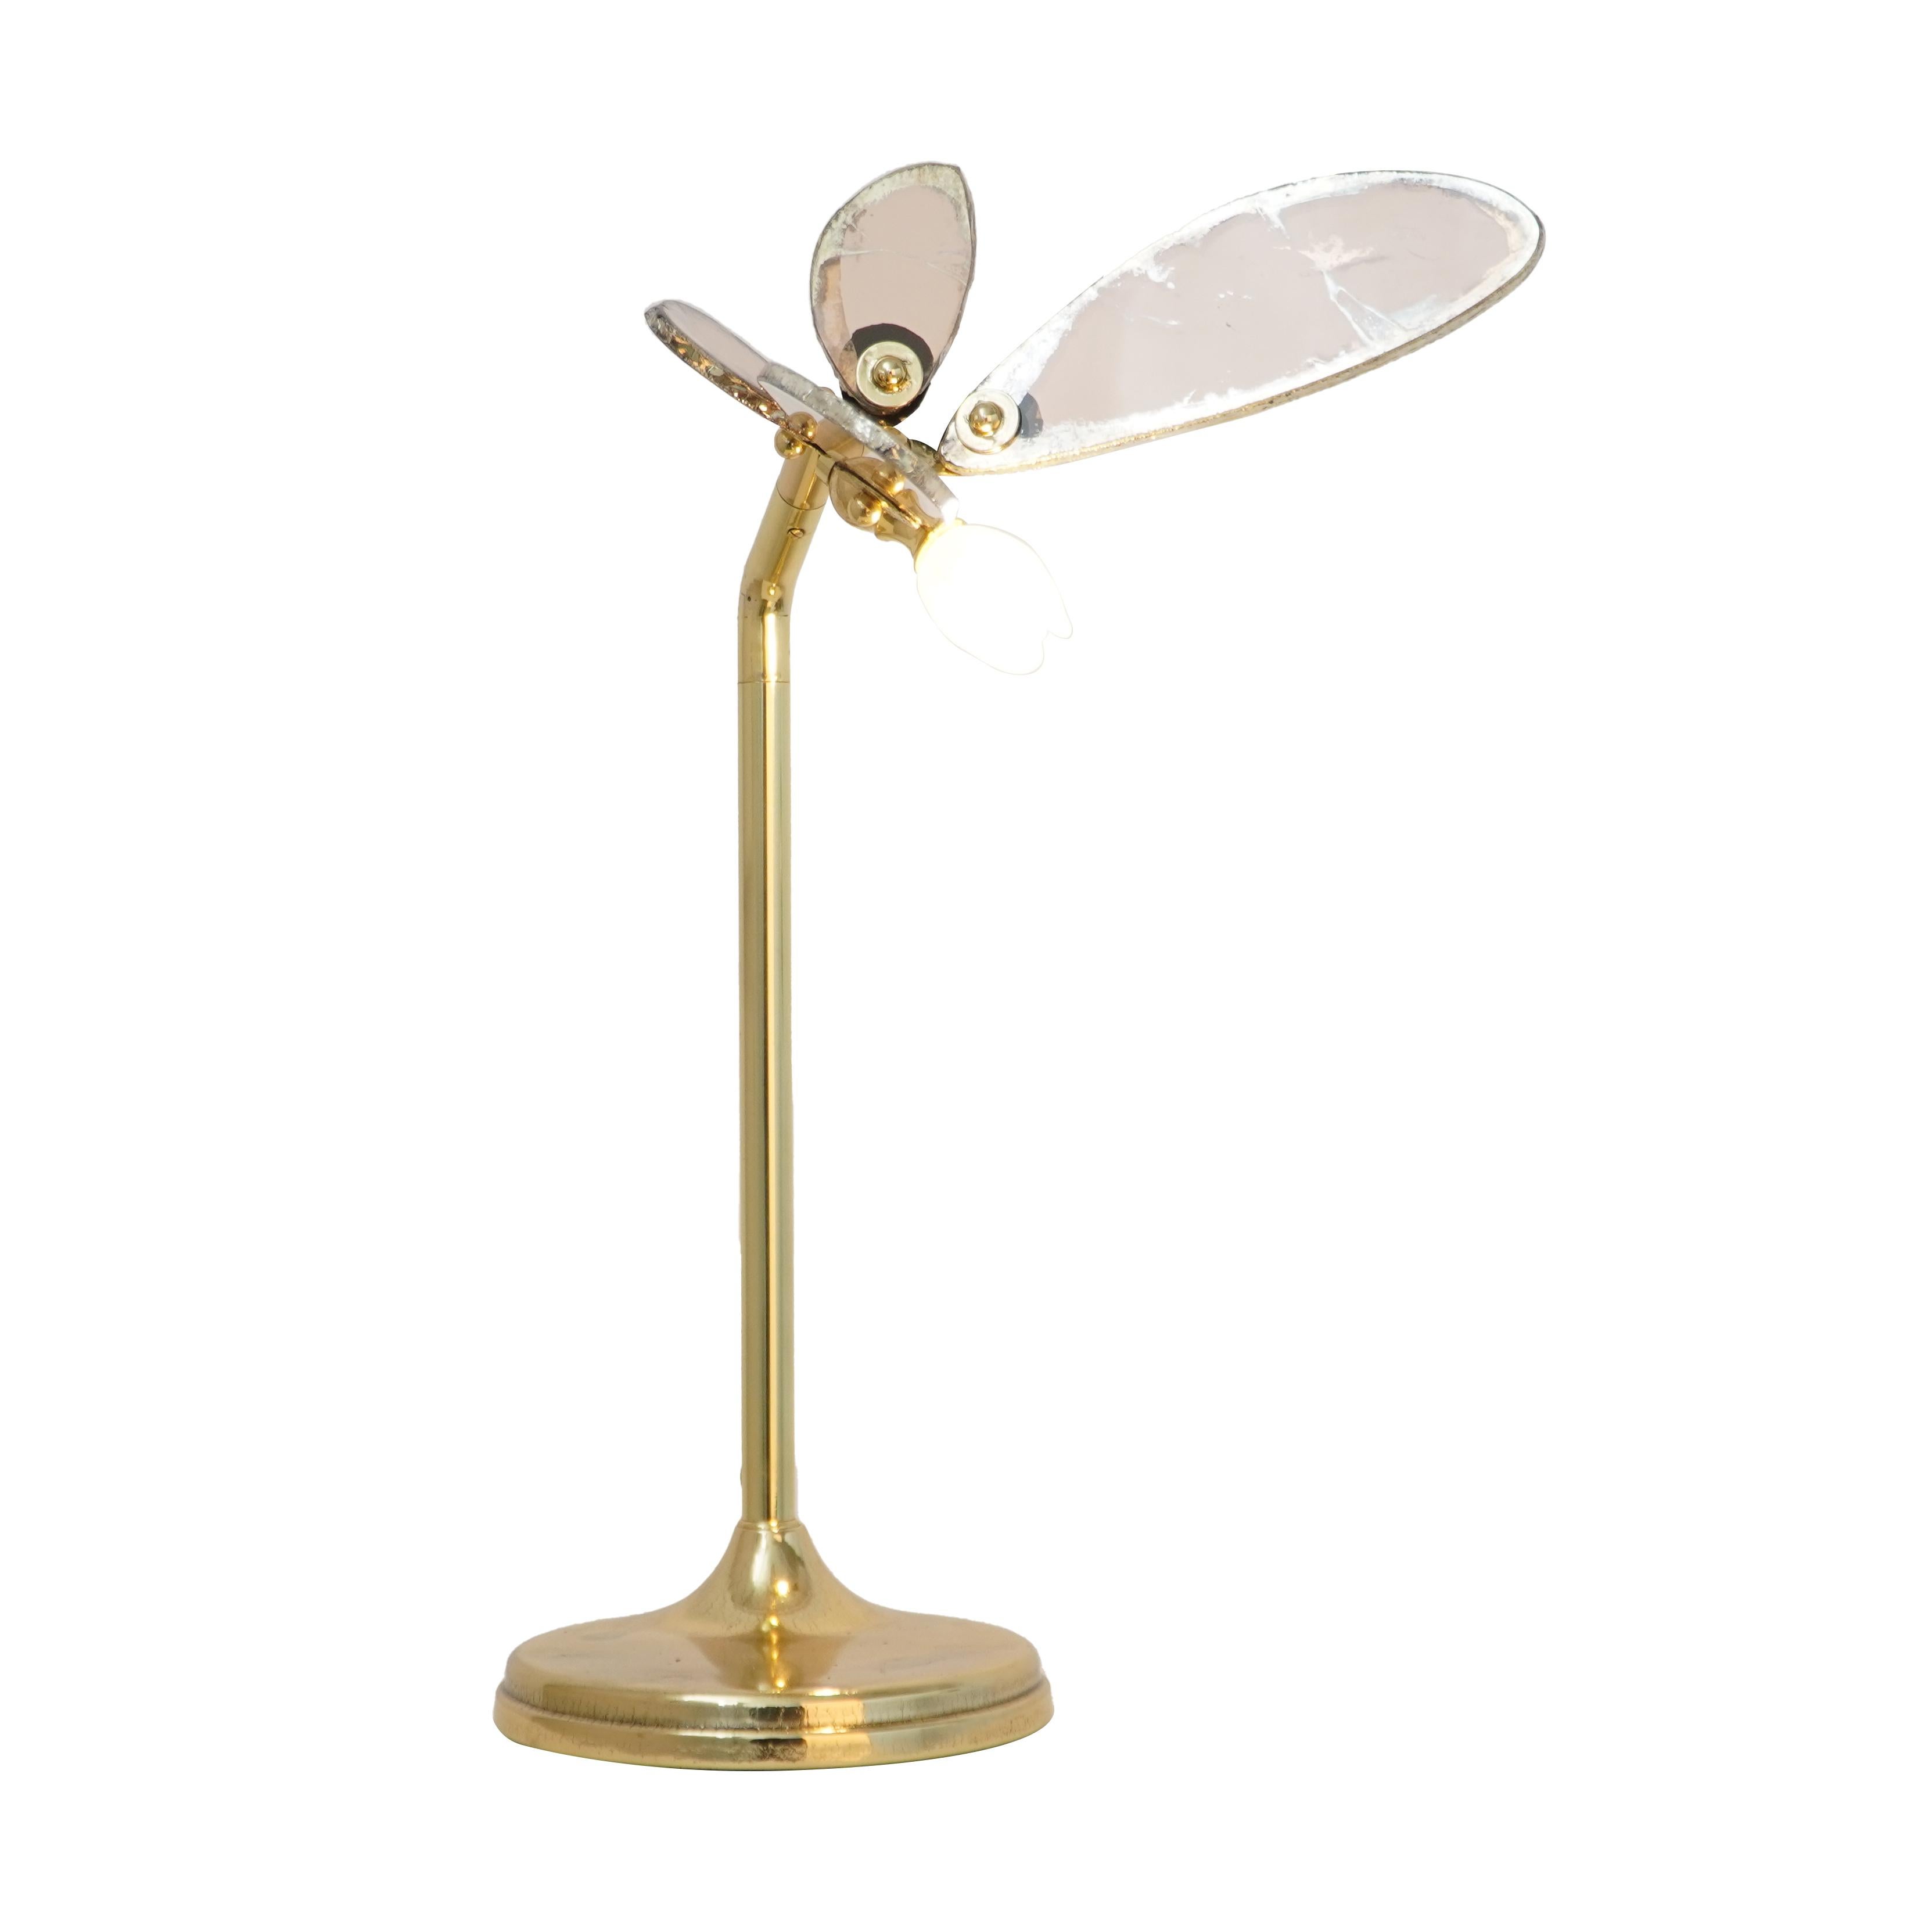 The fairy fragrance of freedom, reminiscent of a dragonfly, draws the wall space with its movable body to radiate rays of lights in all directions with three-dimensionality.

Silvered glass wings and a forged brass body, are the symbol of innovative